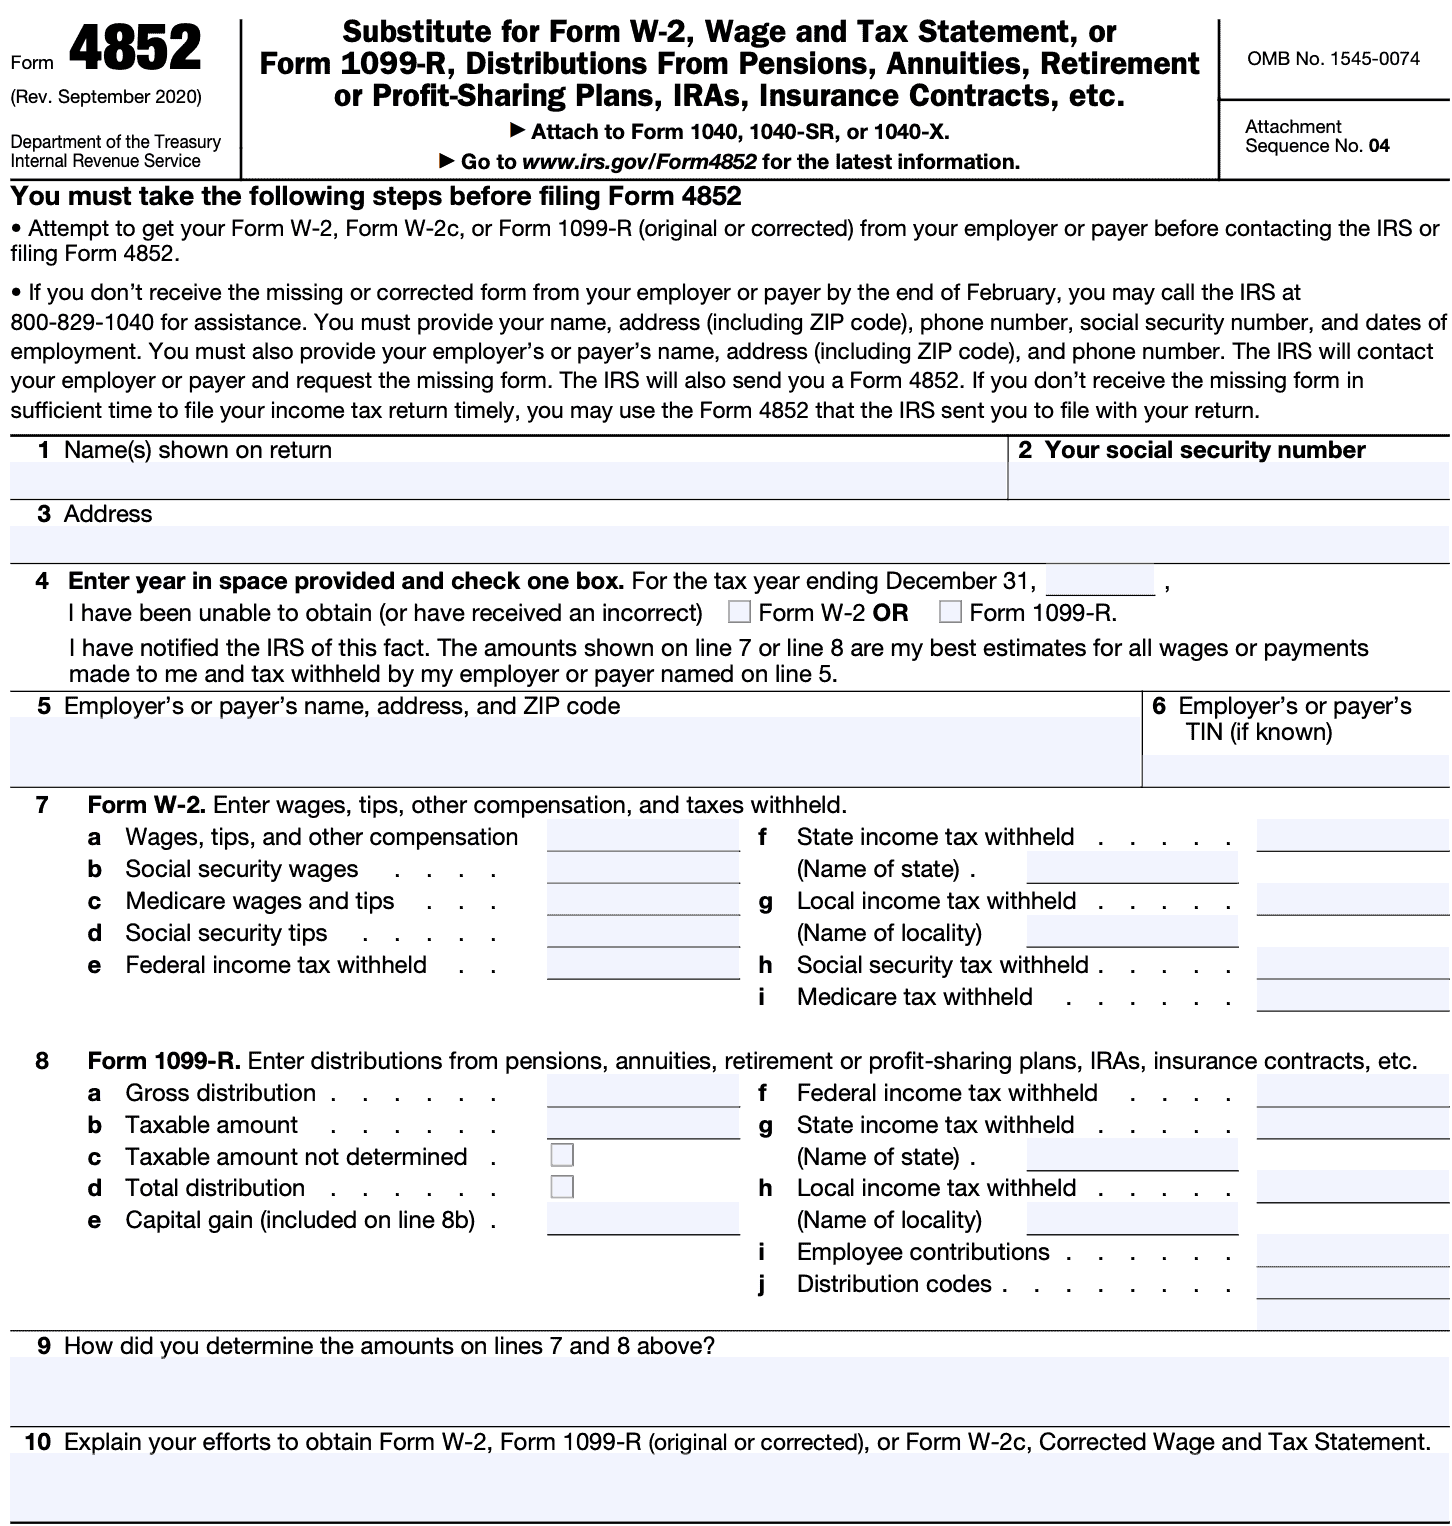 irs-form-4852-a-guide-to-substitute-forms